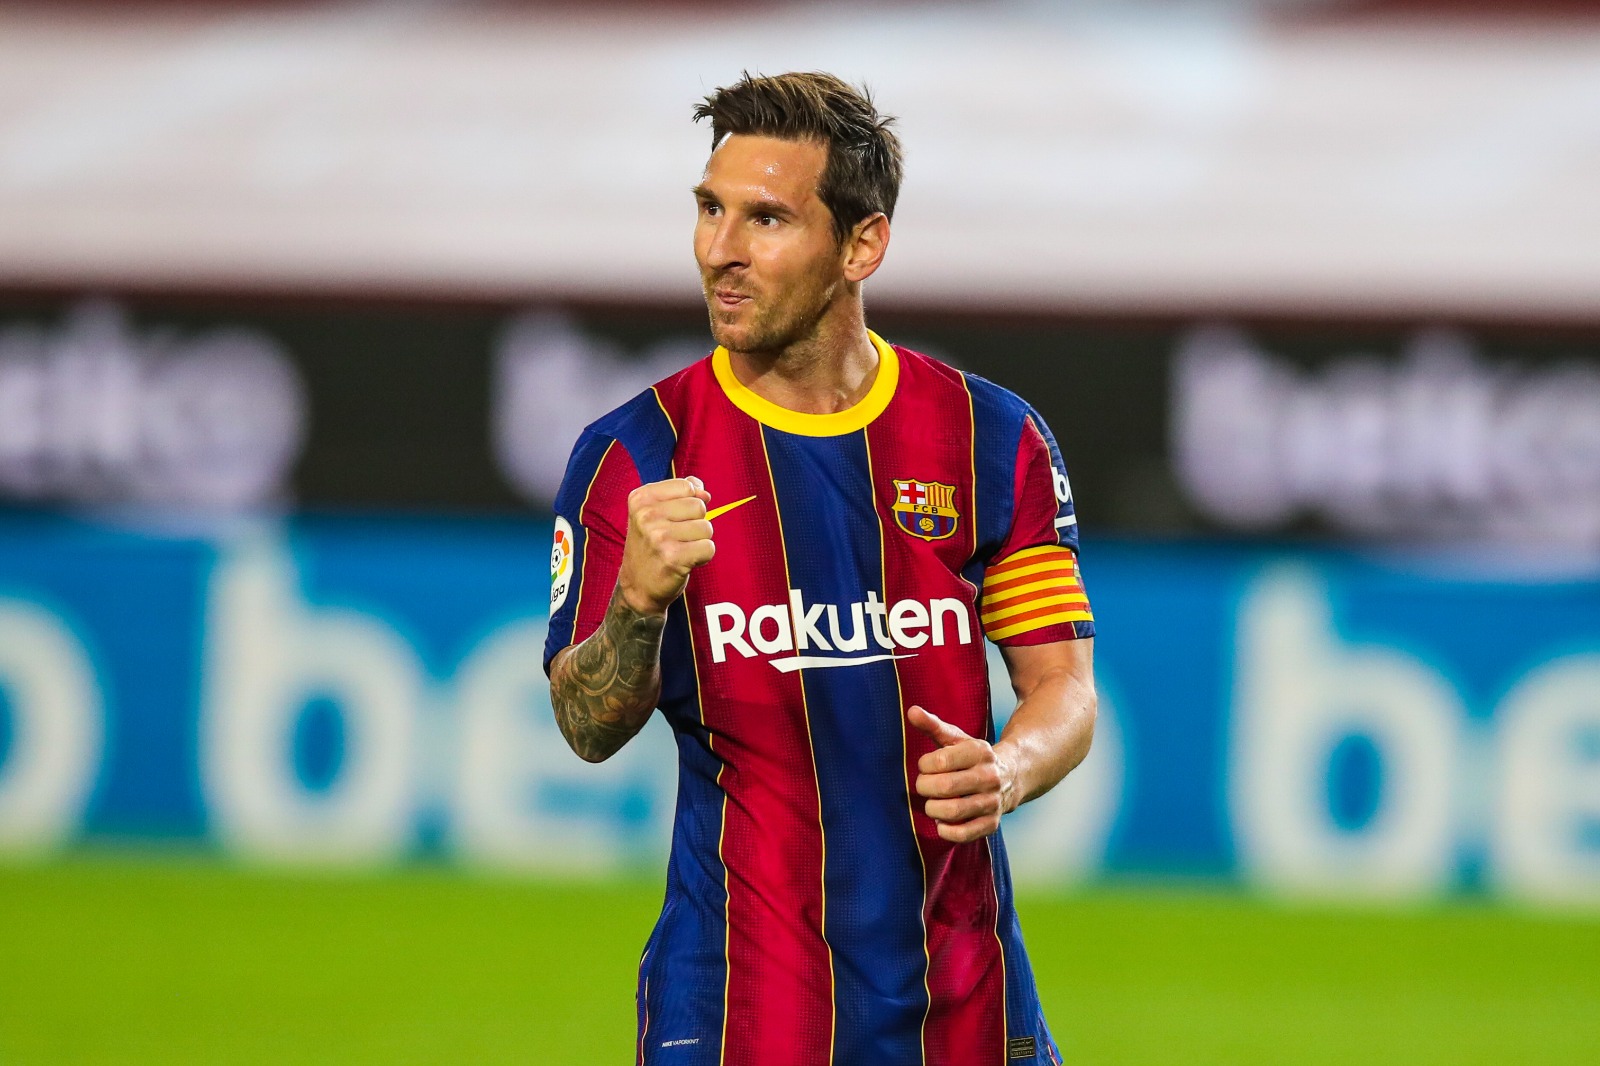 Messi officially becomes a free agent as superstar’s Barcelona contract expires